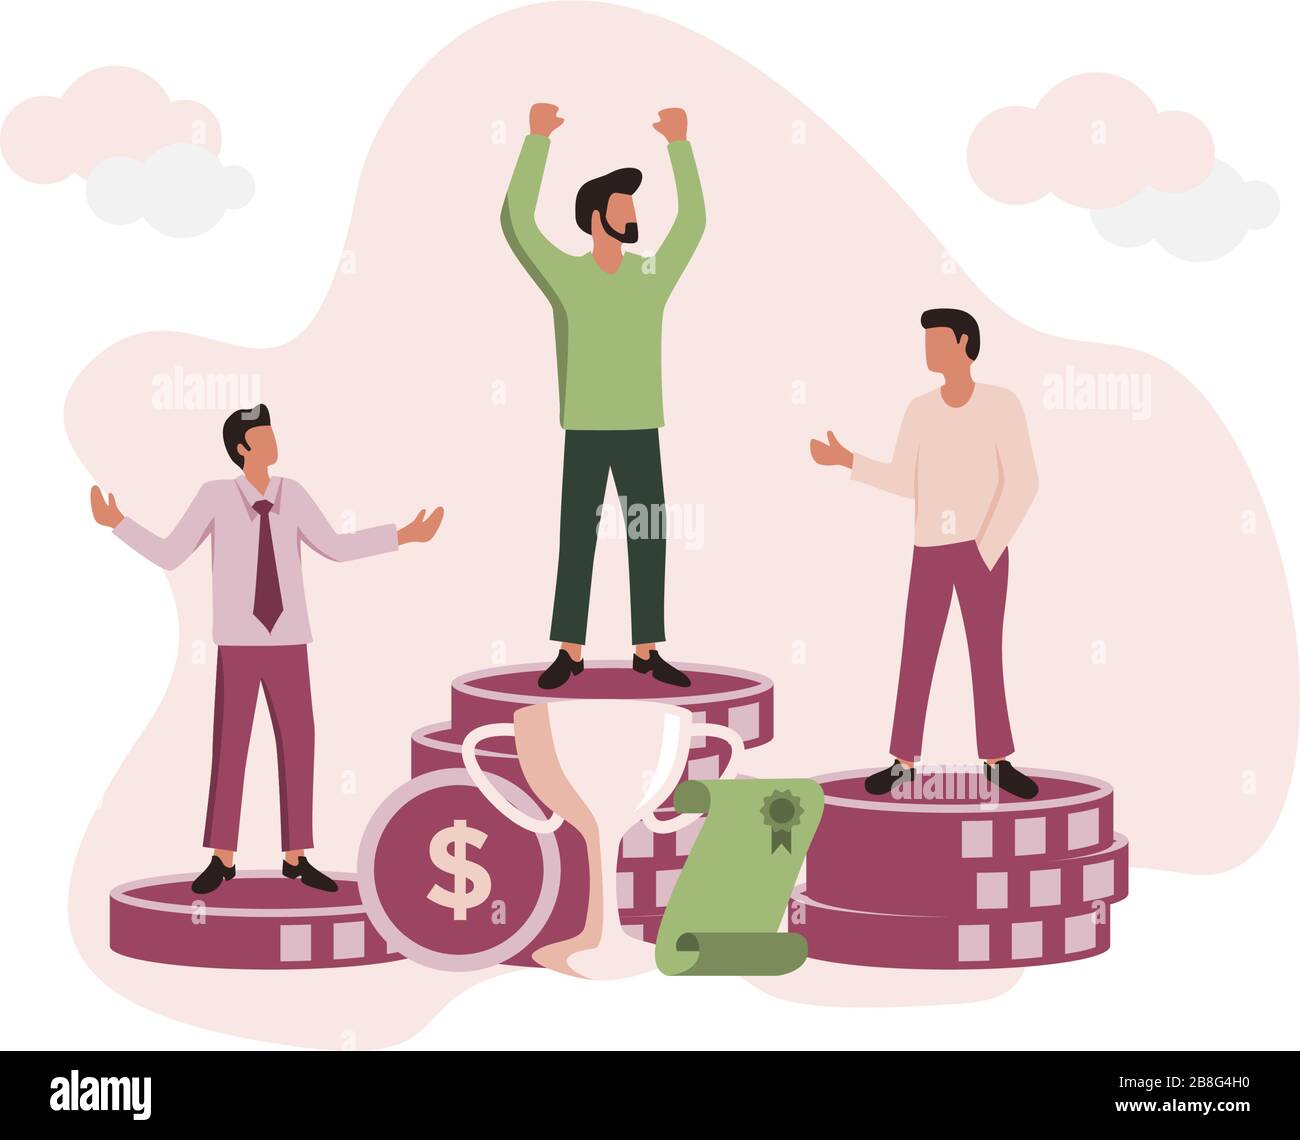 People Illustration get a success. Celebrating success on the top of money, trophy and certificate at the background Stock Vector